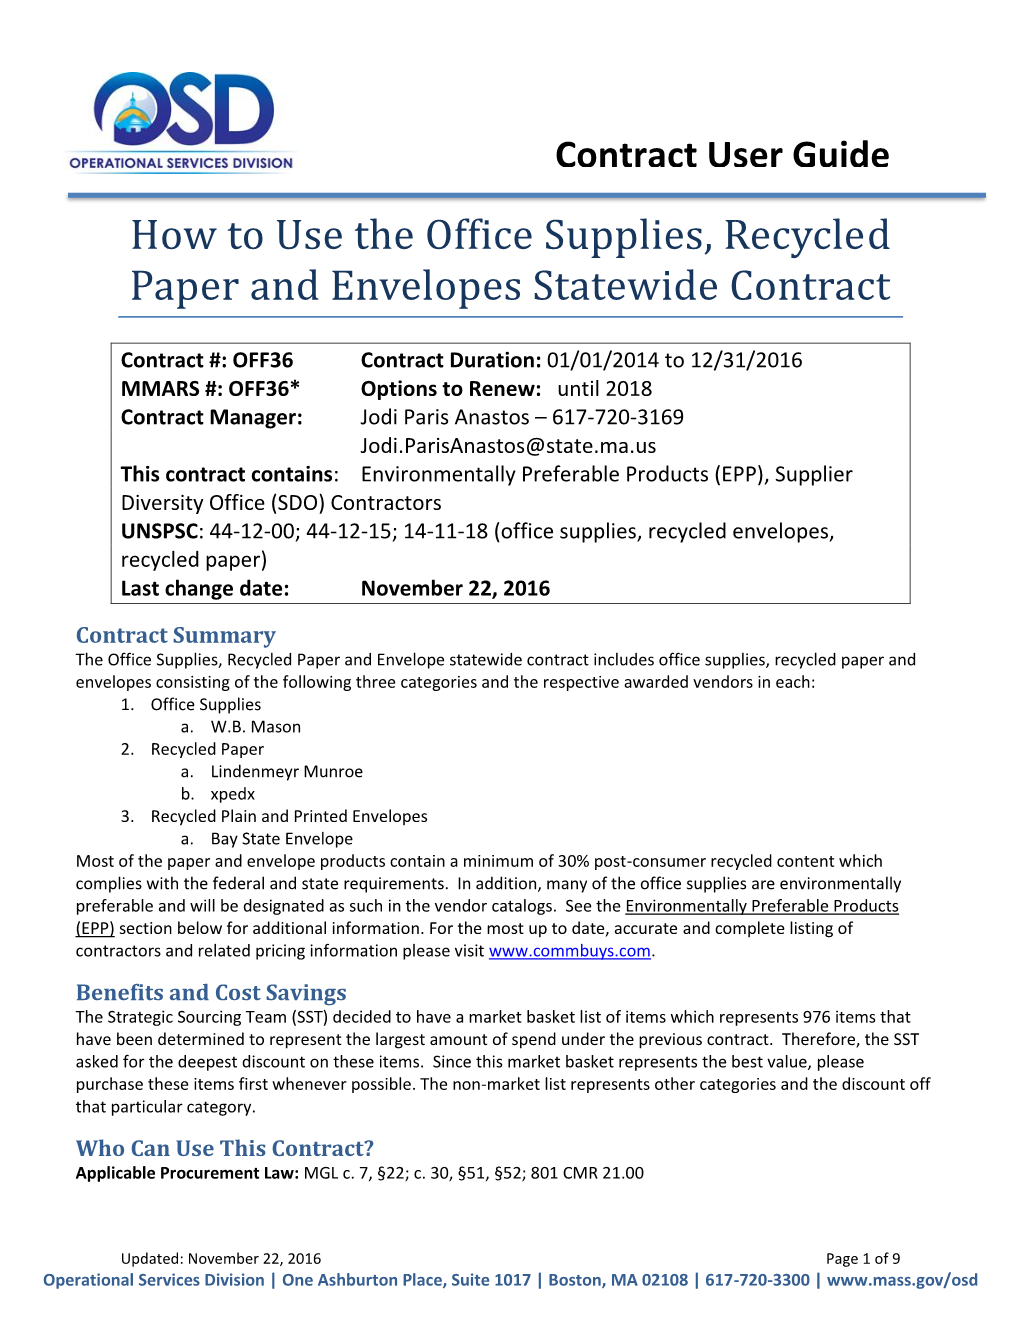 How to Use the Office Supplies, Recycled Paper and Envelopes Statewide Contract